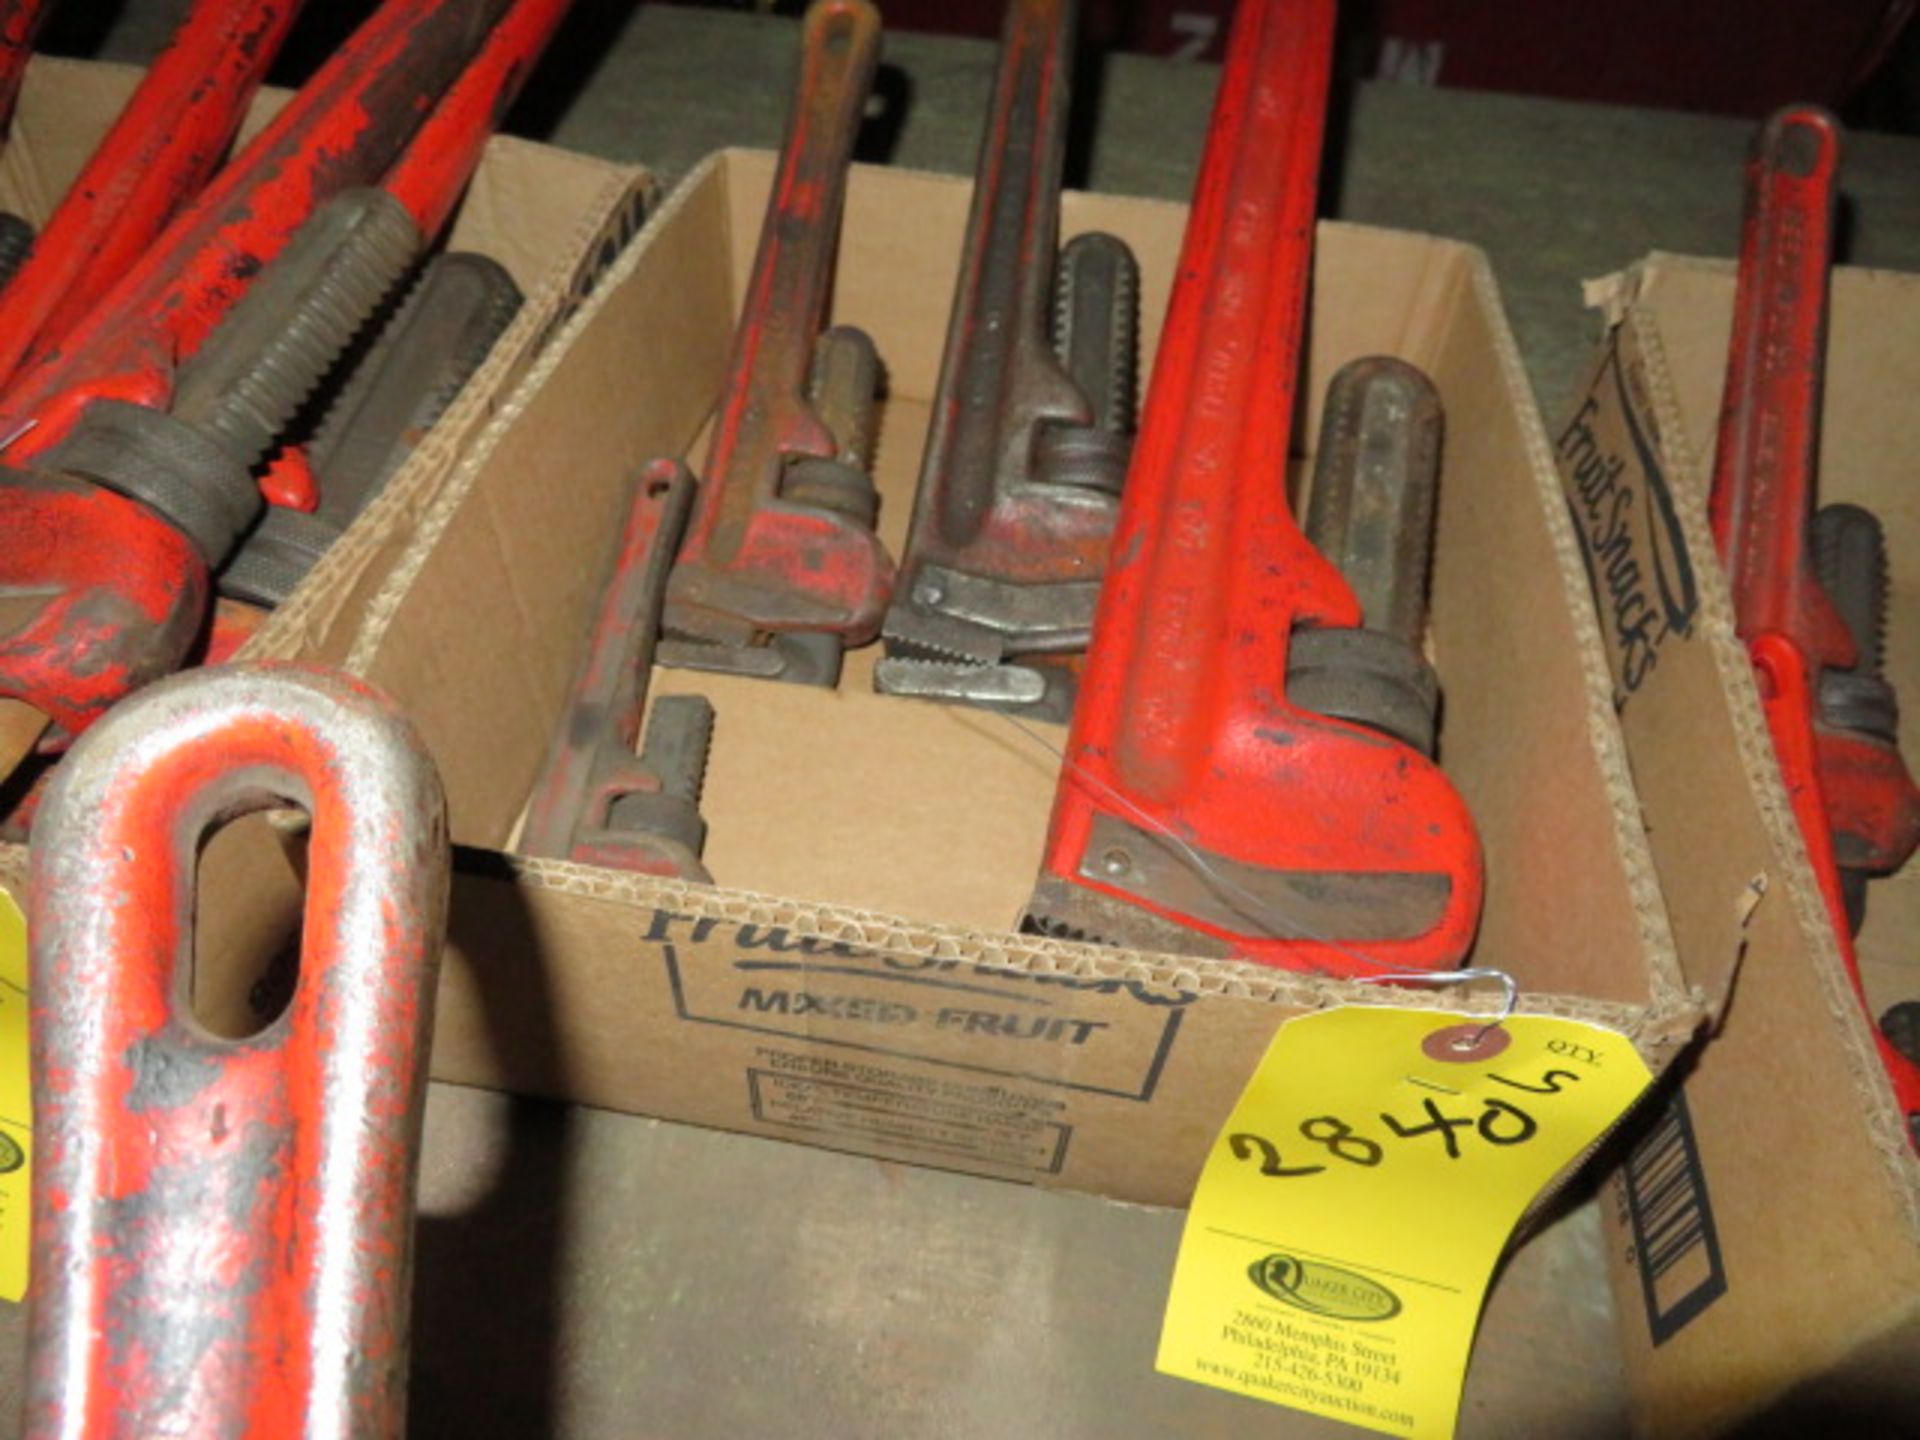 5- RIDGID STEEL PIPE WRENCHES, 8"- 24"